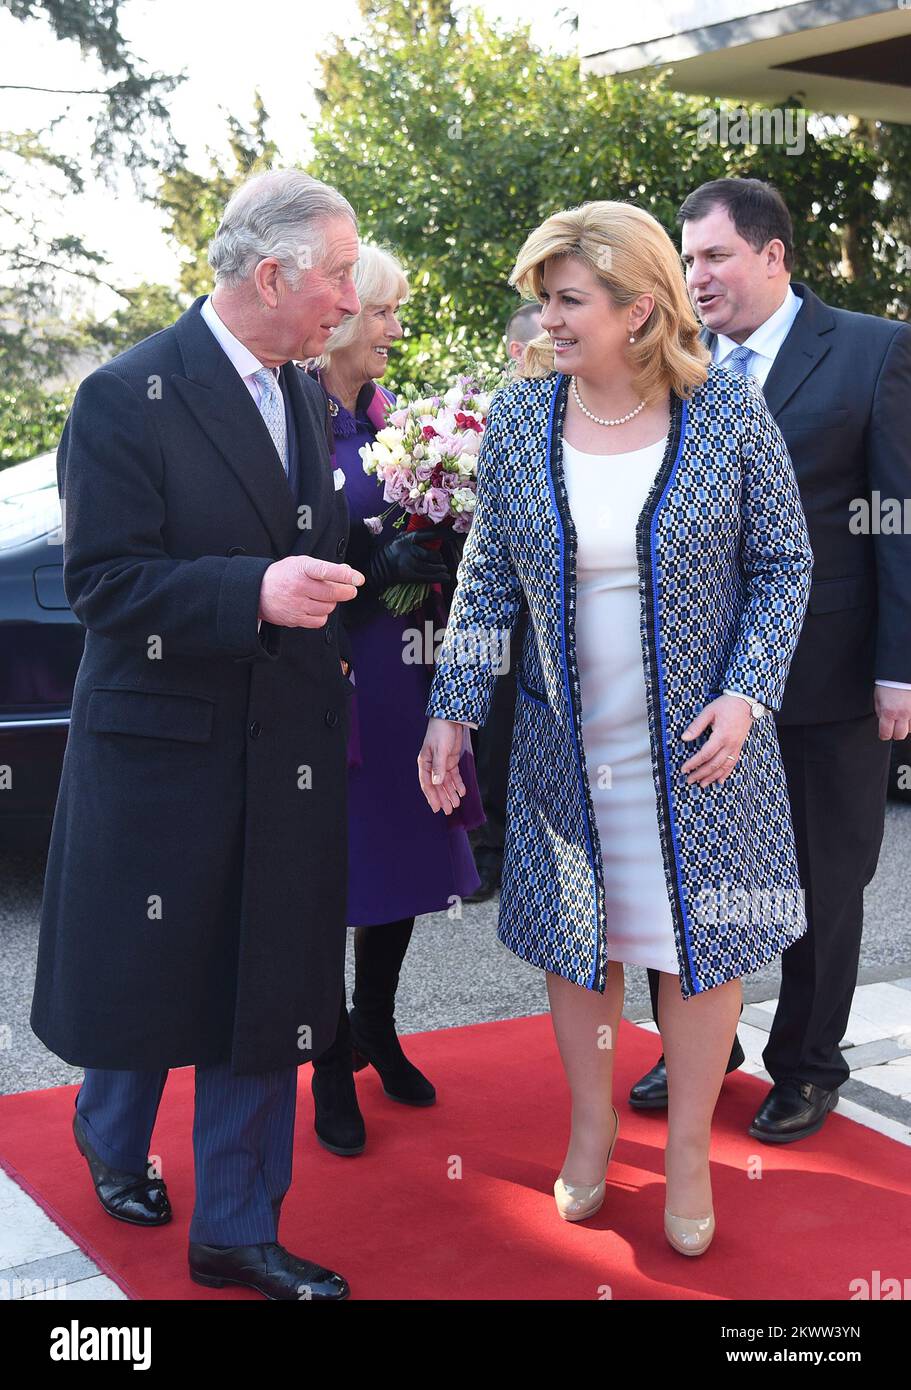 14.03.2016., Zagreb, Croatia - British Crown Prince Charles and his wife Camilla, the Duchess of Cornwall, are visiting Croatia as part of a regional tour that will include Serbia, Montenegro and Kosovo. They are officially welcomed by President Kolinda Grabar-Kitarovic at Presidential Palace.   Stock Photo